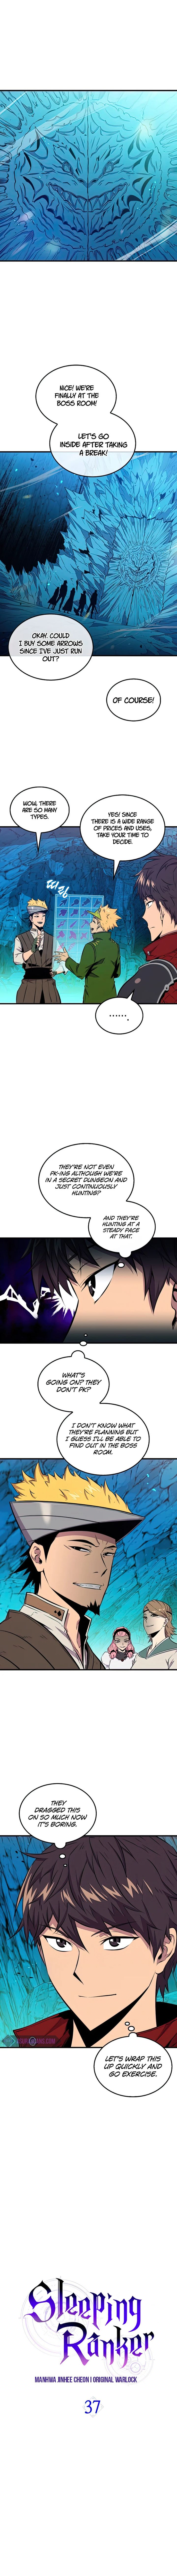 Sleeping Ranker Chapter 37 Page 1